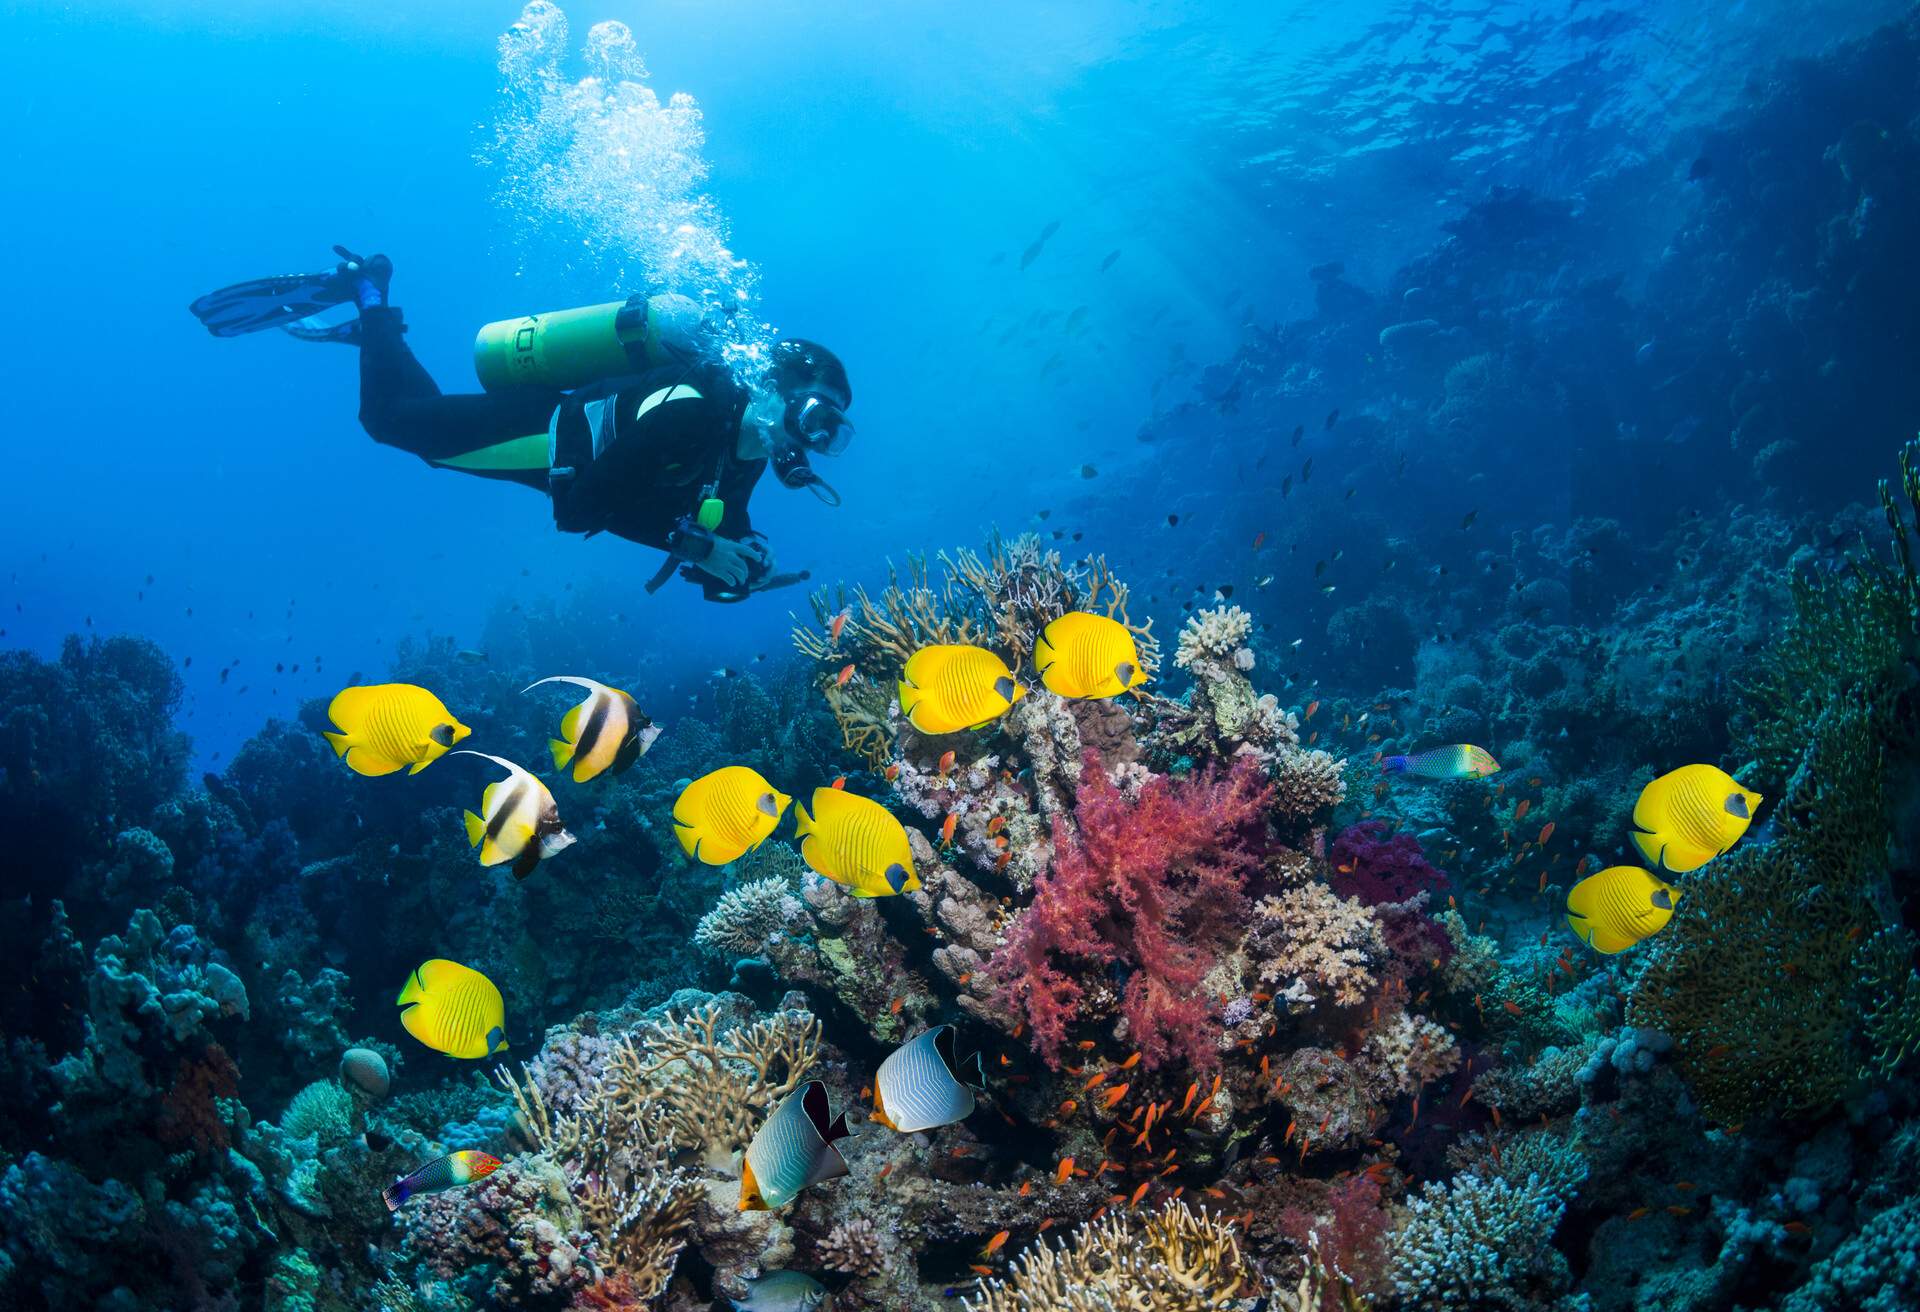 Coral reef scenery with golden butterflyfish (Chaetodon semilarvatus), Red Sea bannerfish (Heniochus intermedius), orange face butterflyfish or hooded butterflyfis (Chaetodon larvatus) and scuba diver in background. Egypt, Red Sea.